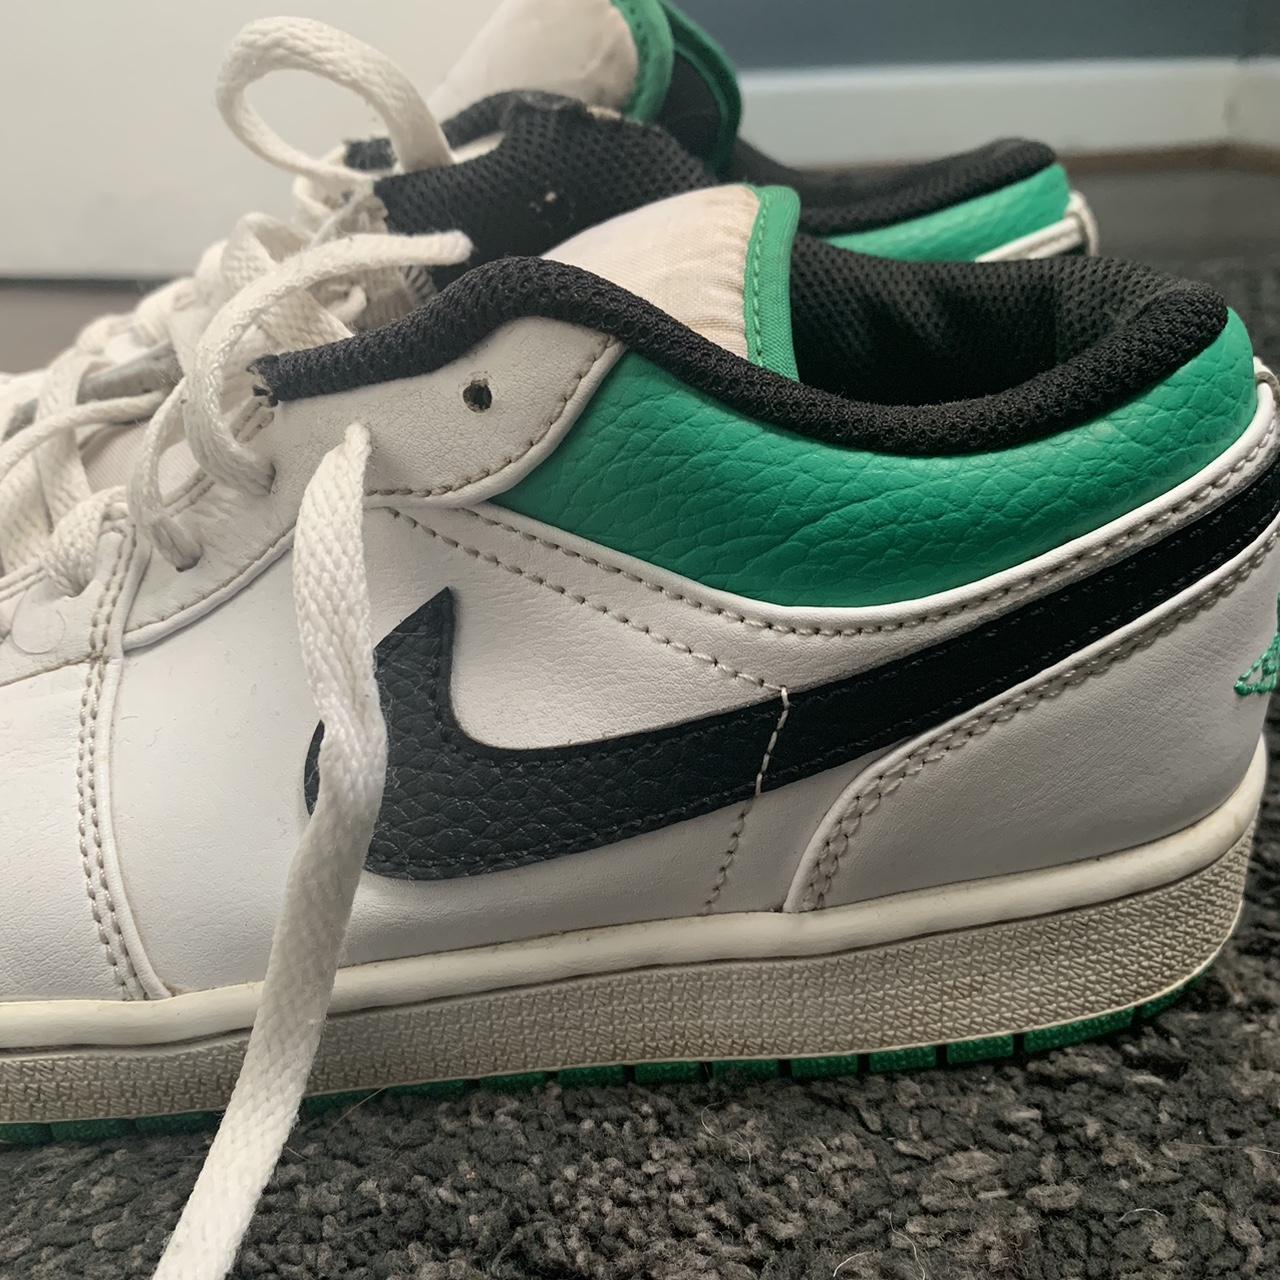 Air Jordan 1 Low “Lucky Green” White Tumbled Leather... - Depop